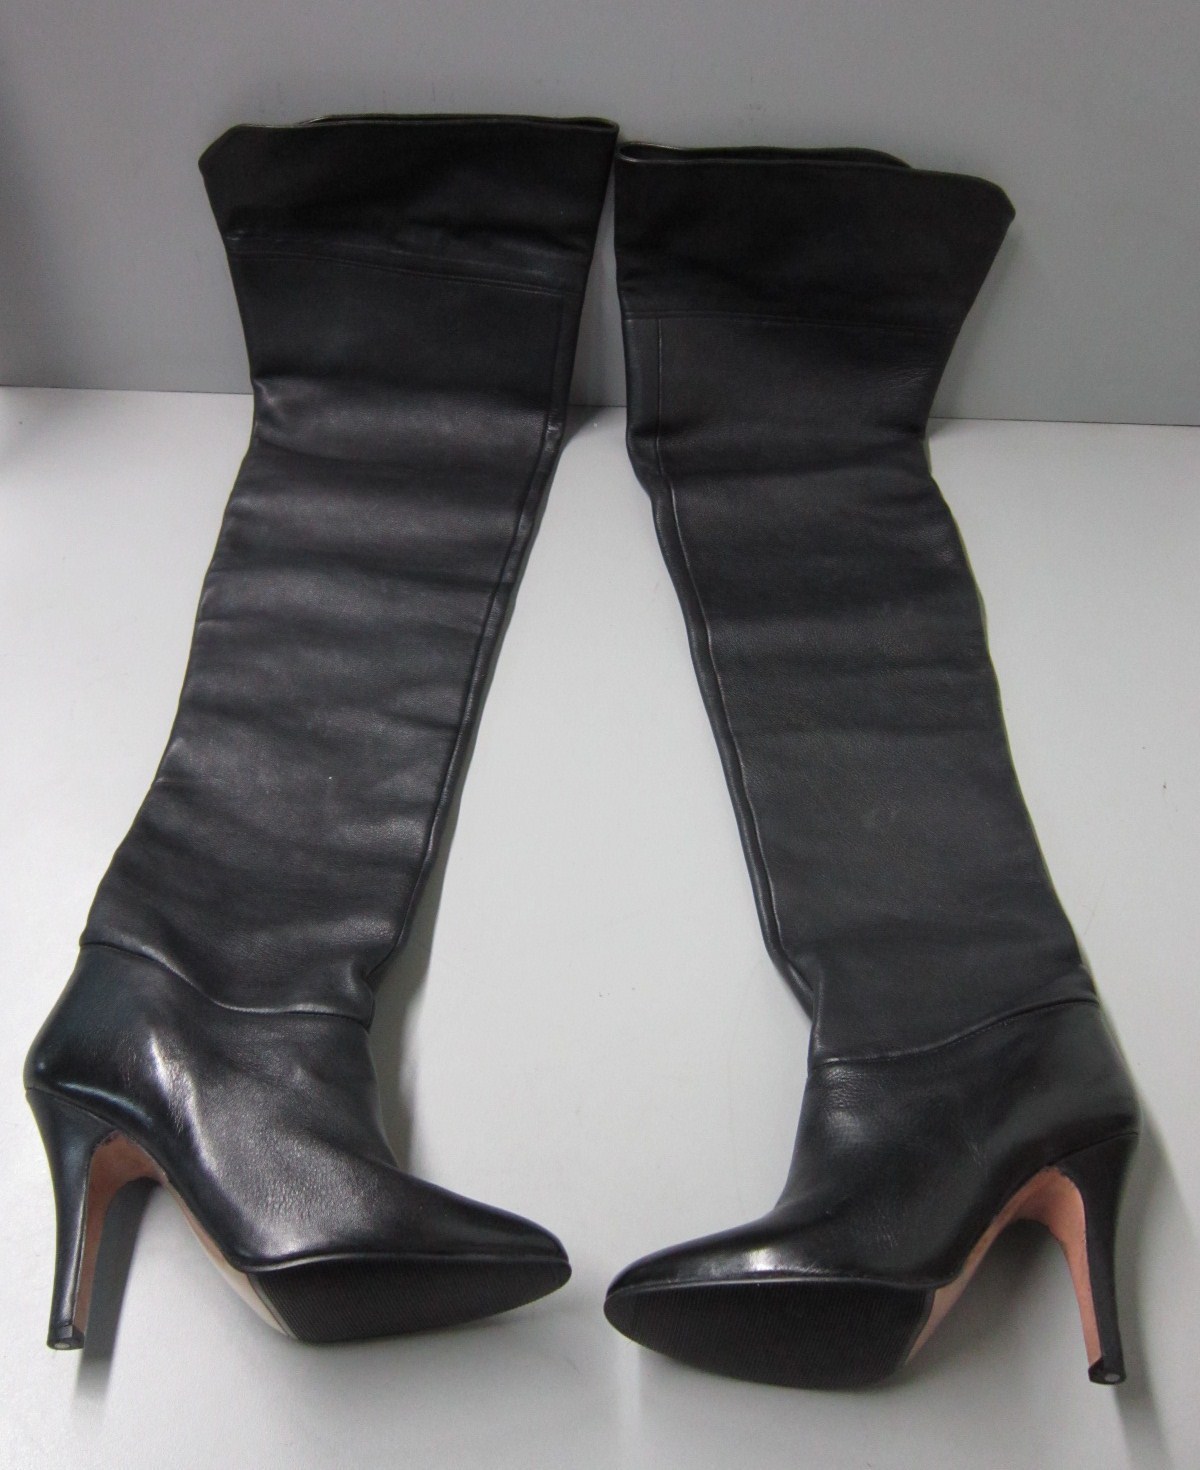 eBay Leather: A deal on Wild Pair unworn crotch boots for $88